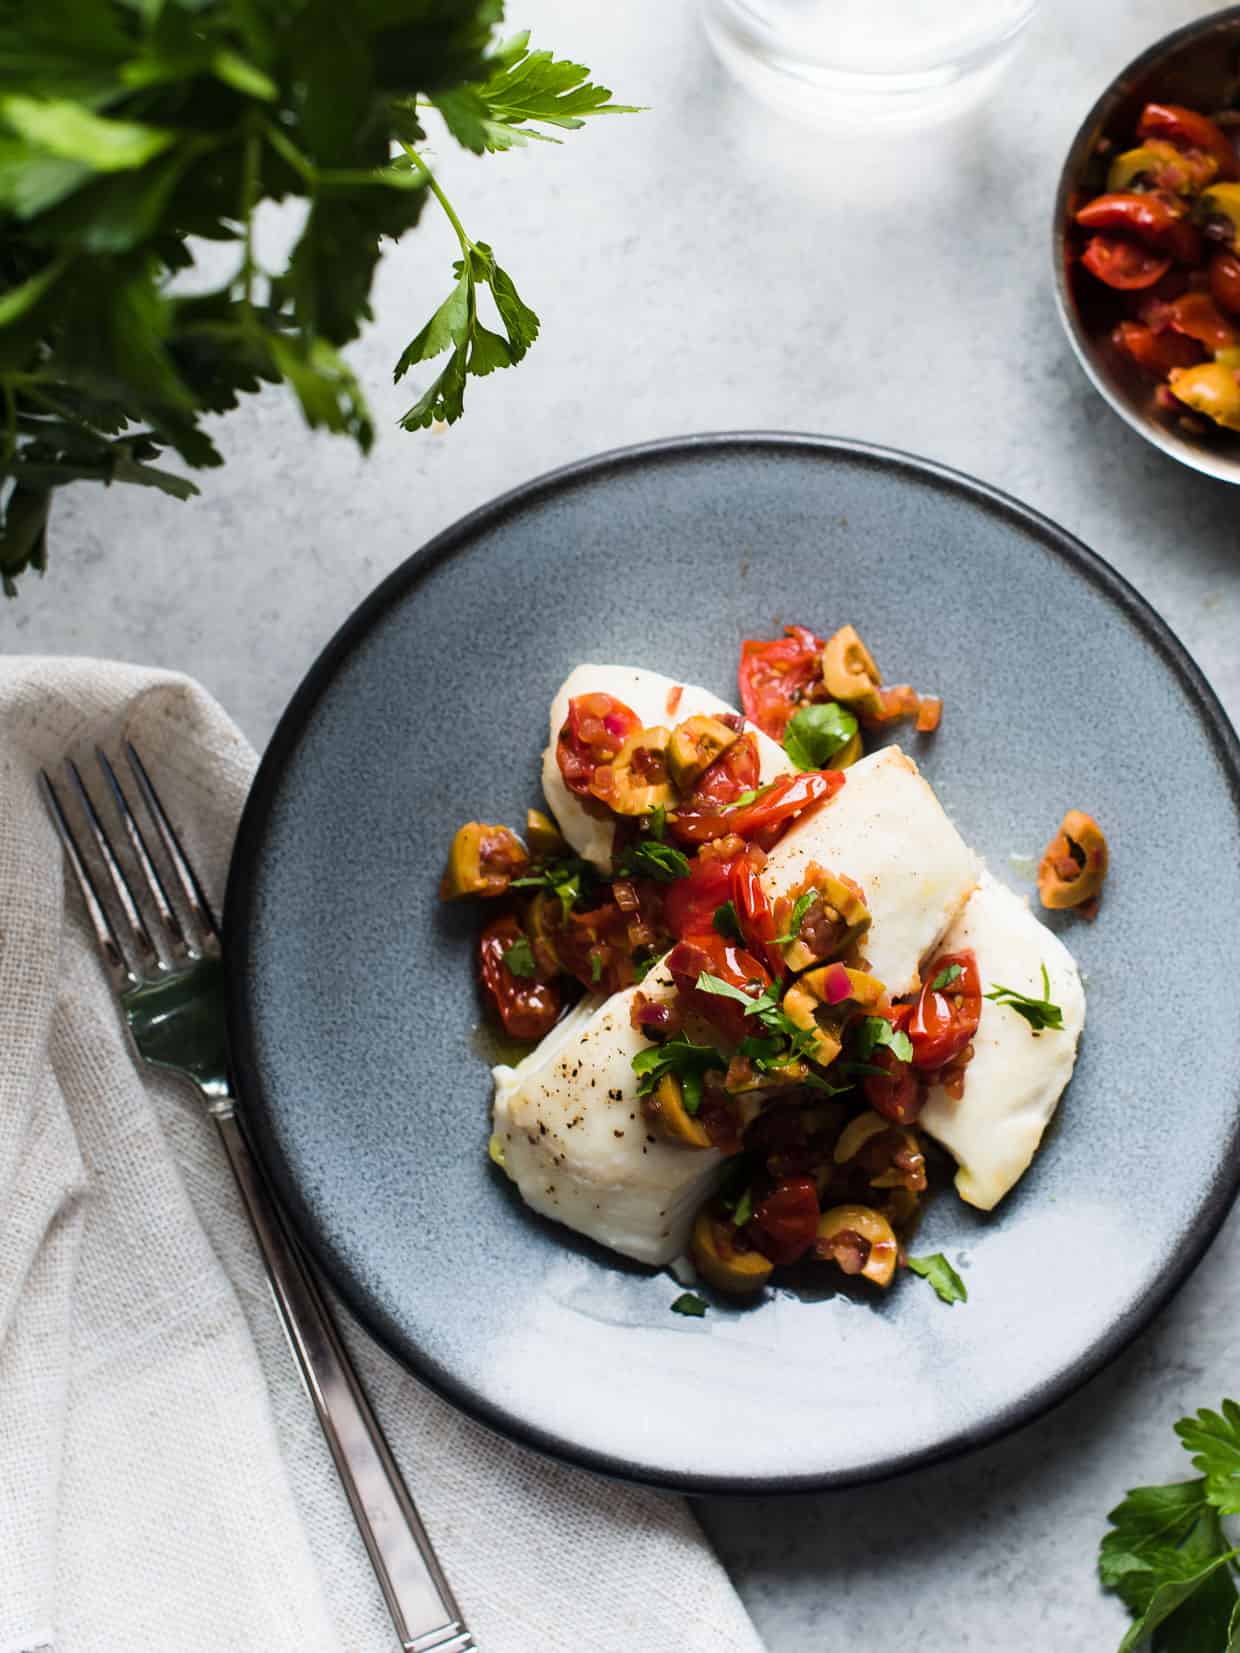 Baked halibut topped with a sauce of olives, onions, tomato and parsley.